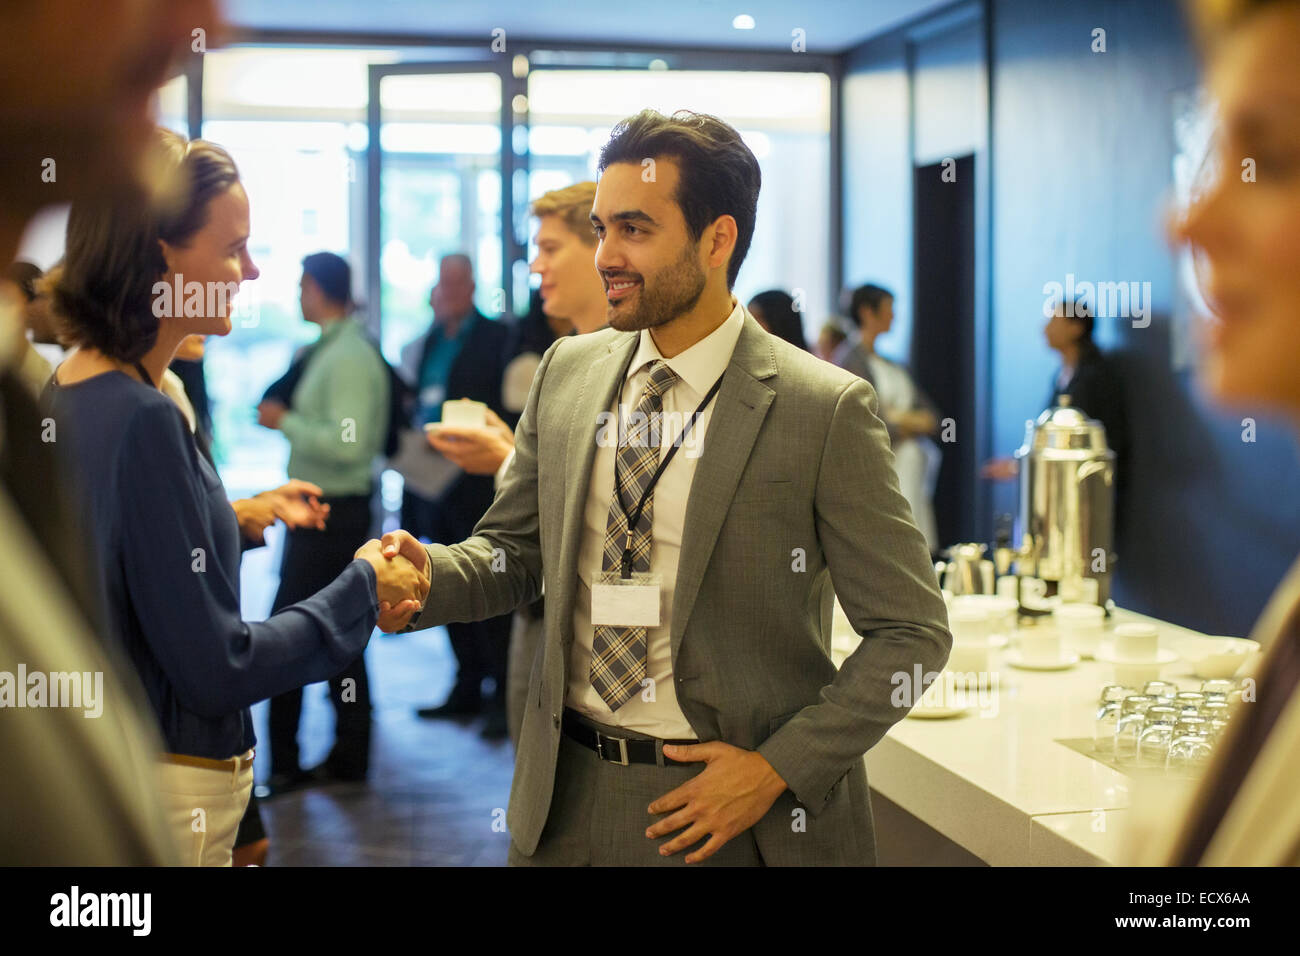 Business people shaking hands during reception in office Stock Photo